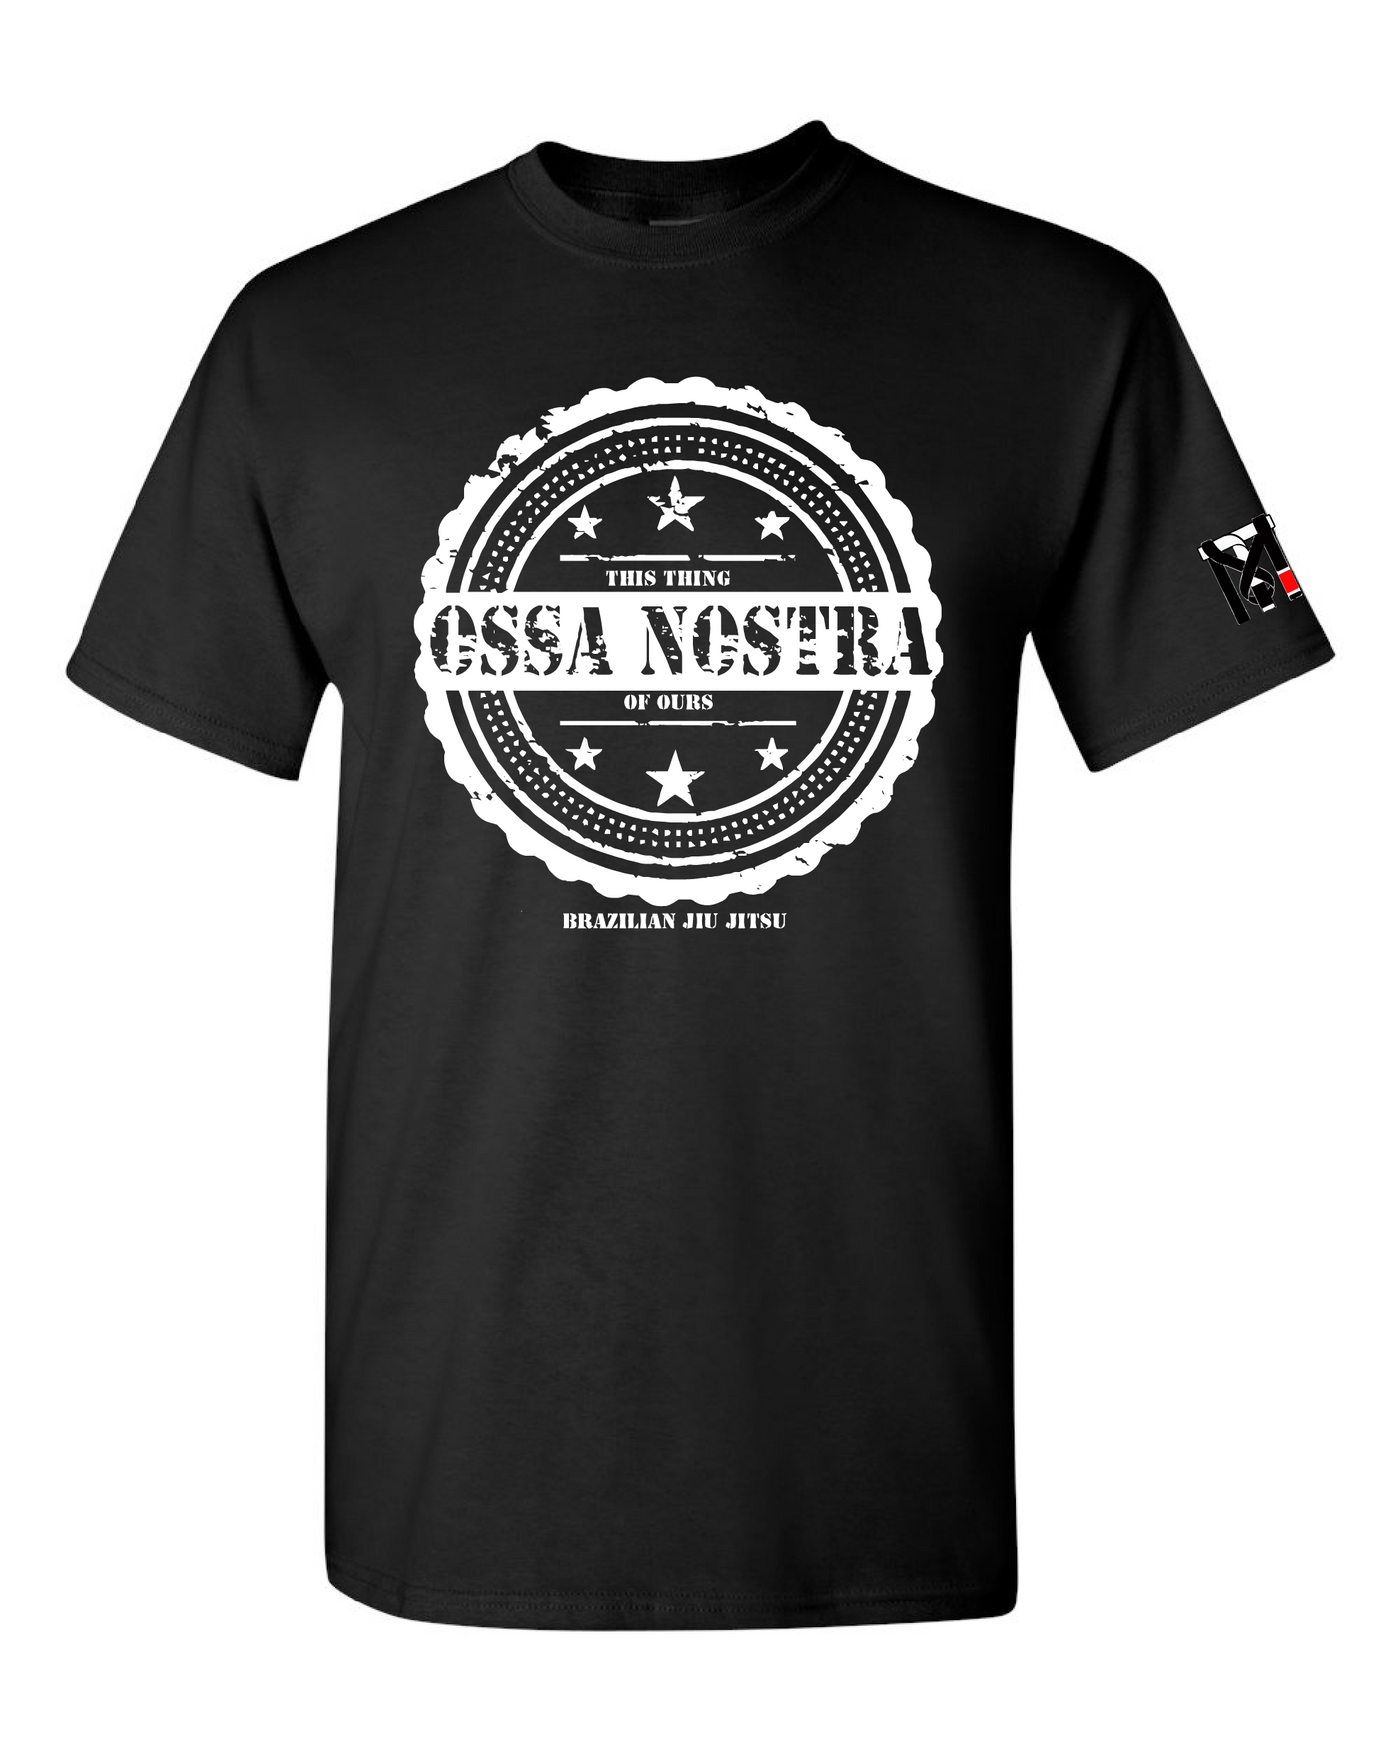 OSSA NOSTRA (This thing of ours) Top Mount Apparel Tee